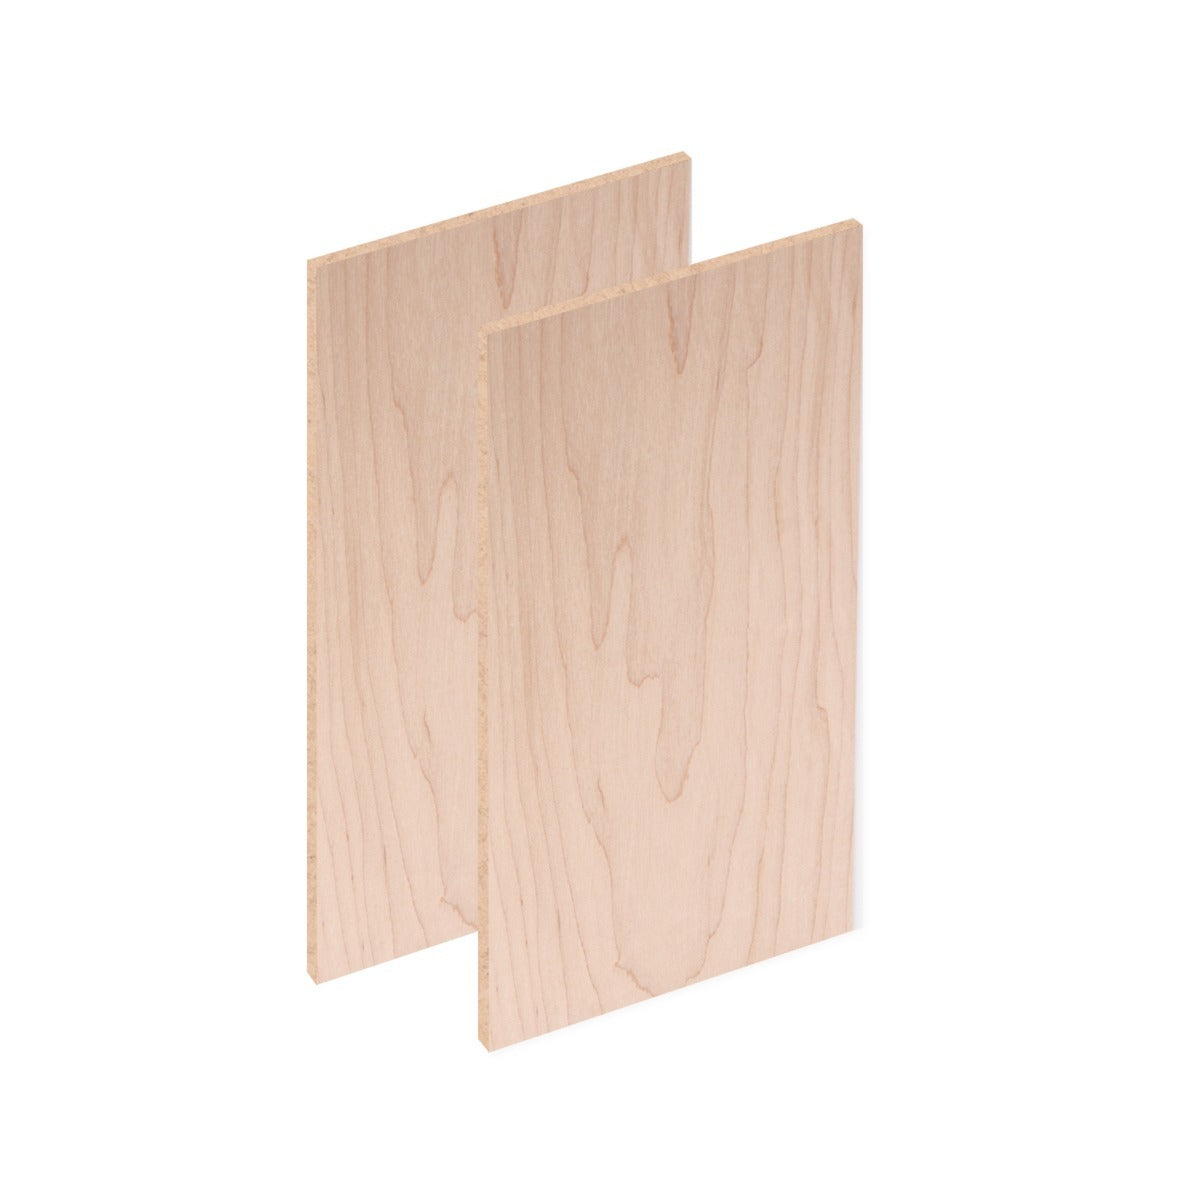 1/8" PLYWOOD SHEETS-Maple